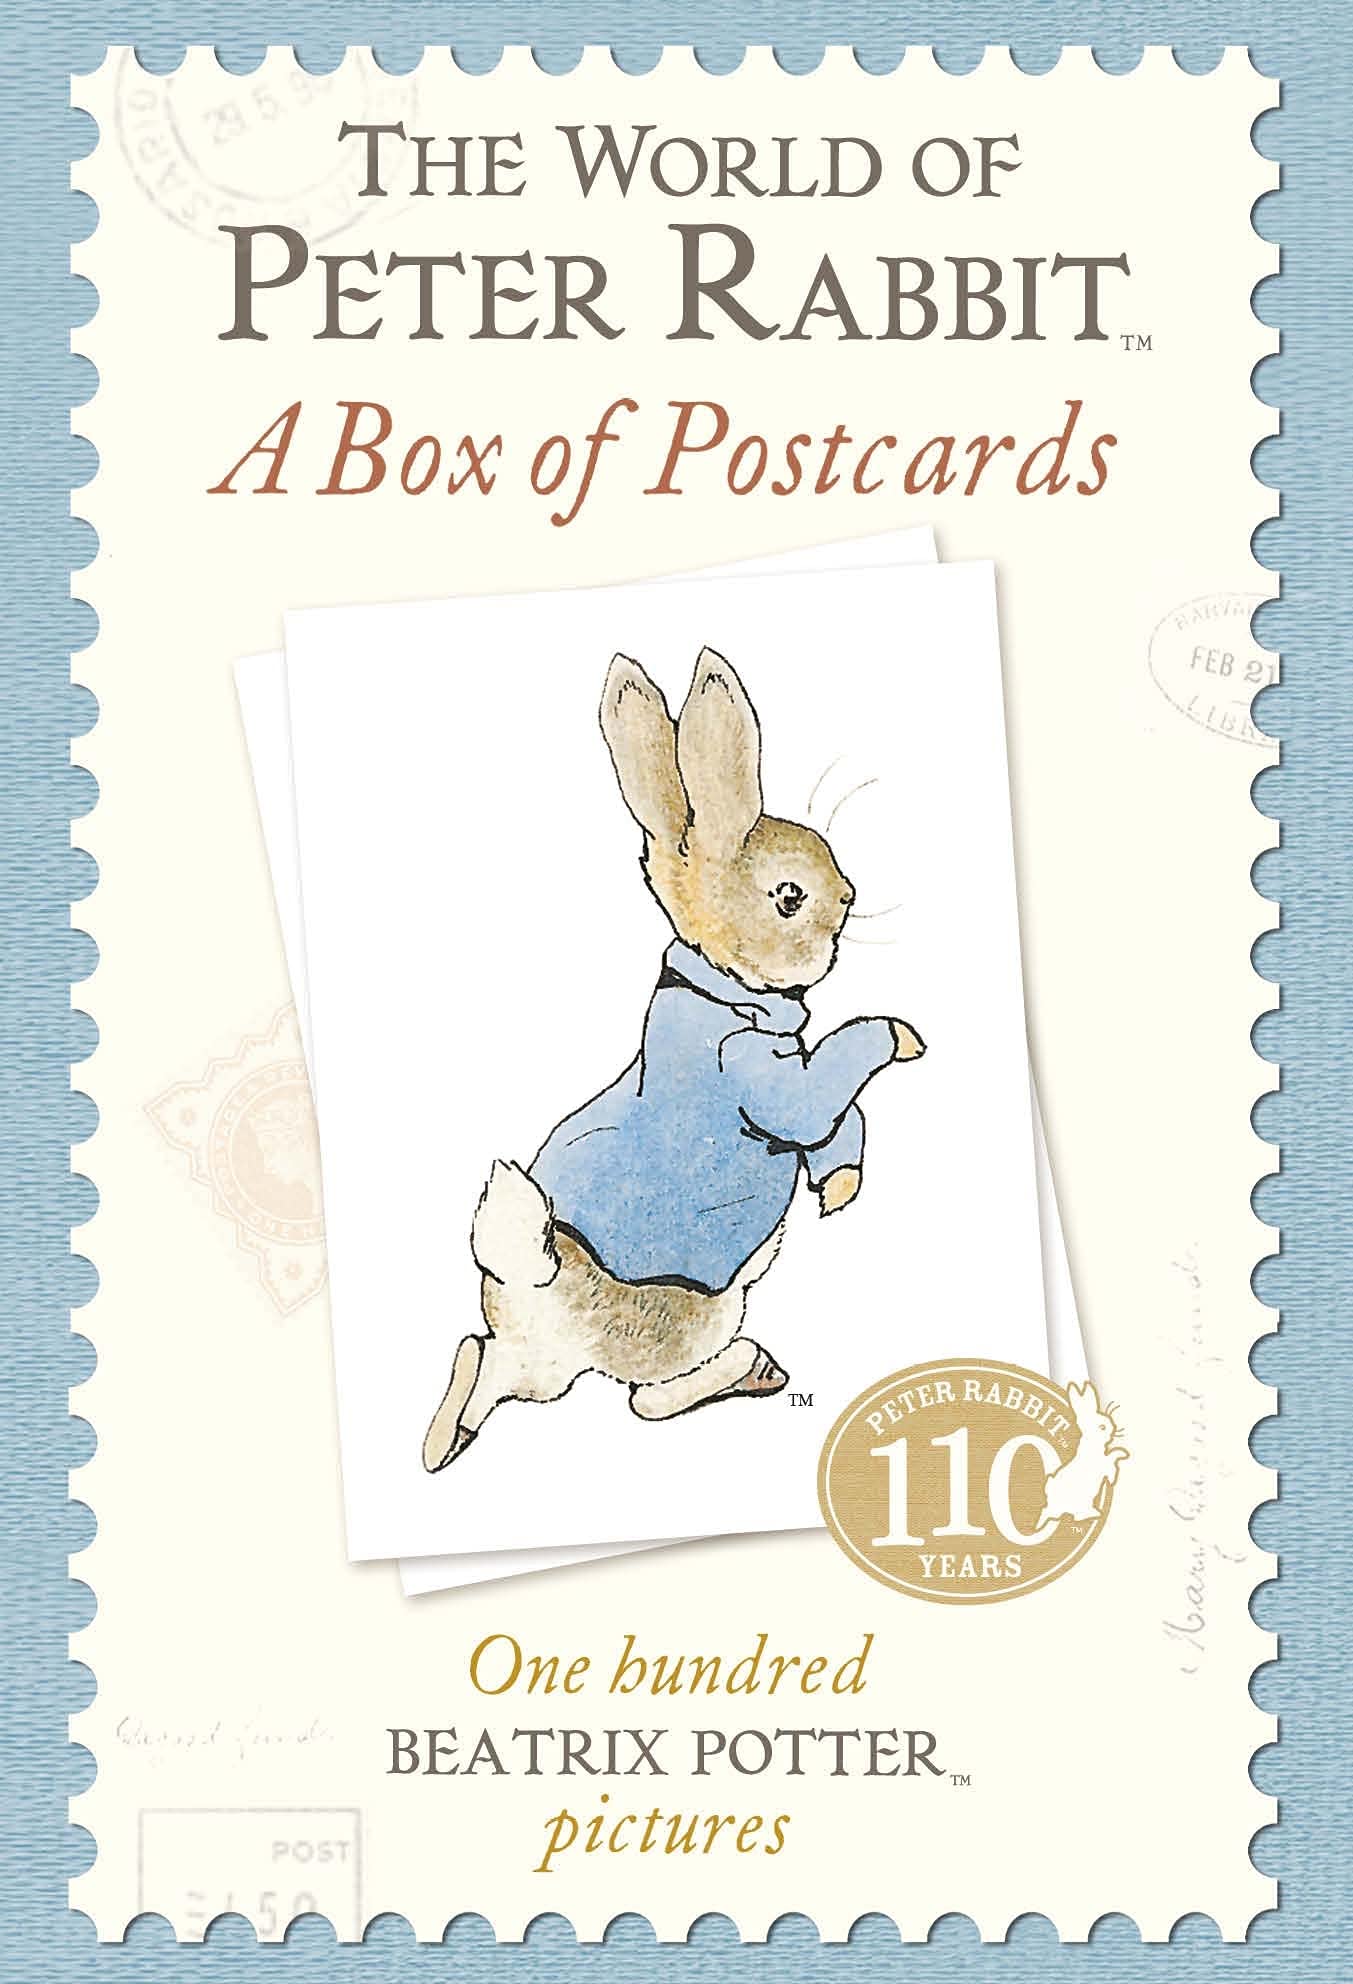 The-World-of-Peter-Rabbit-A-Box-of-Postcards-A.jpg